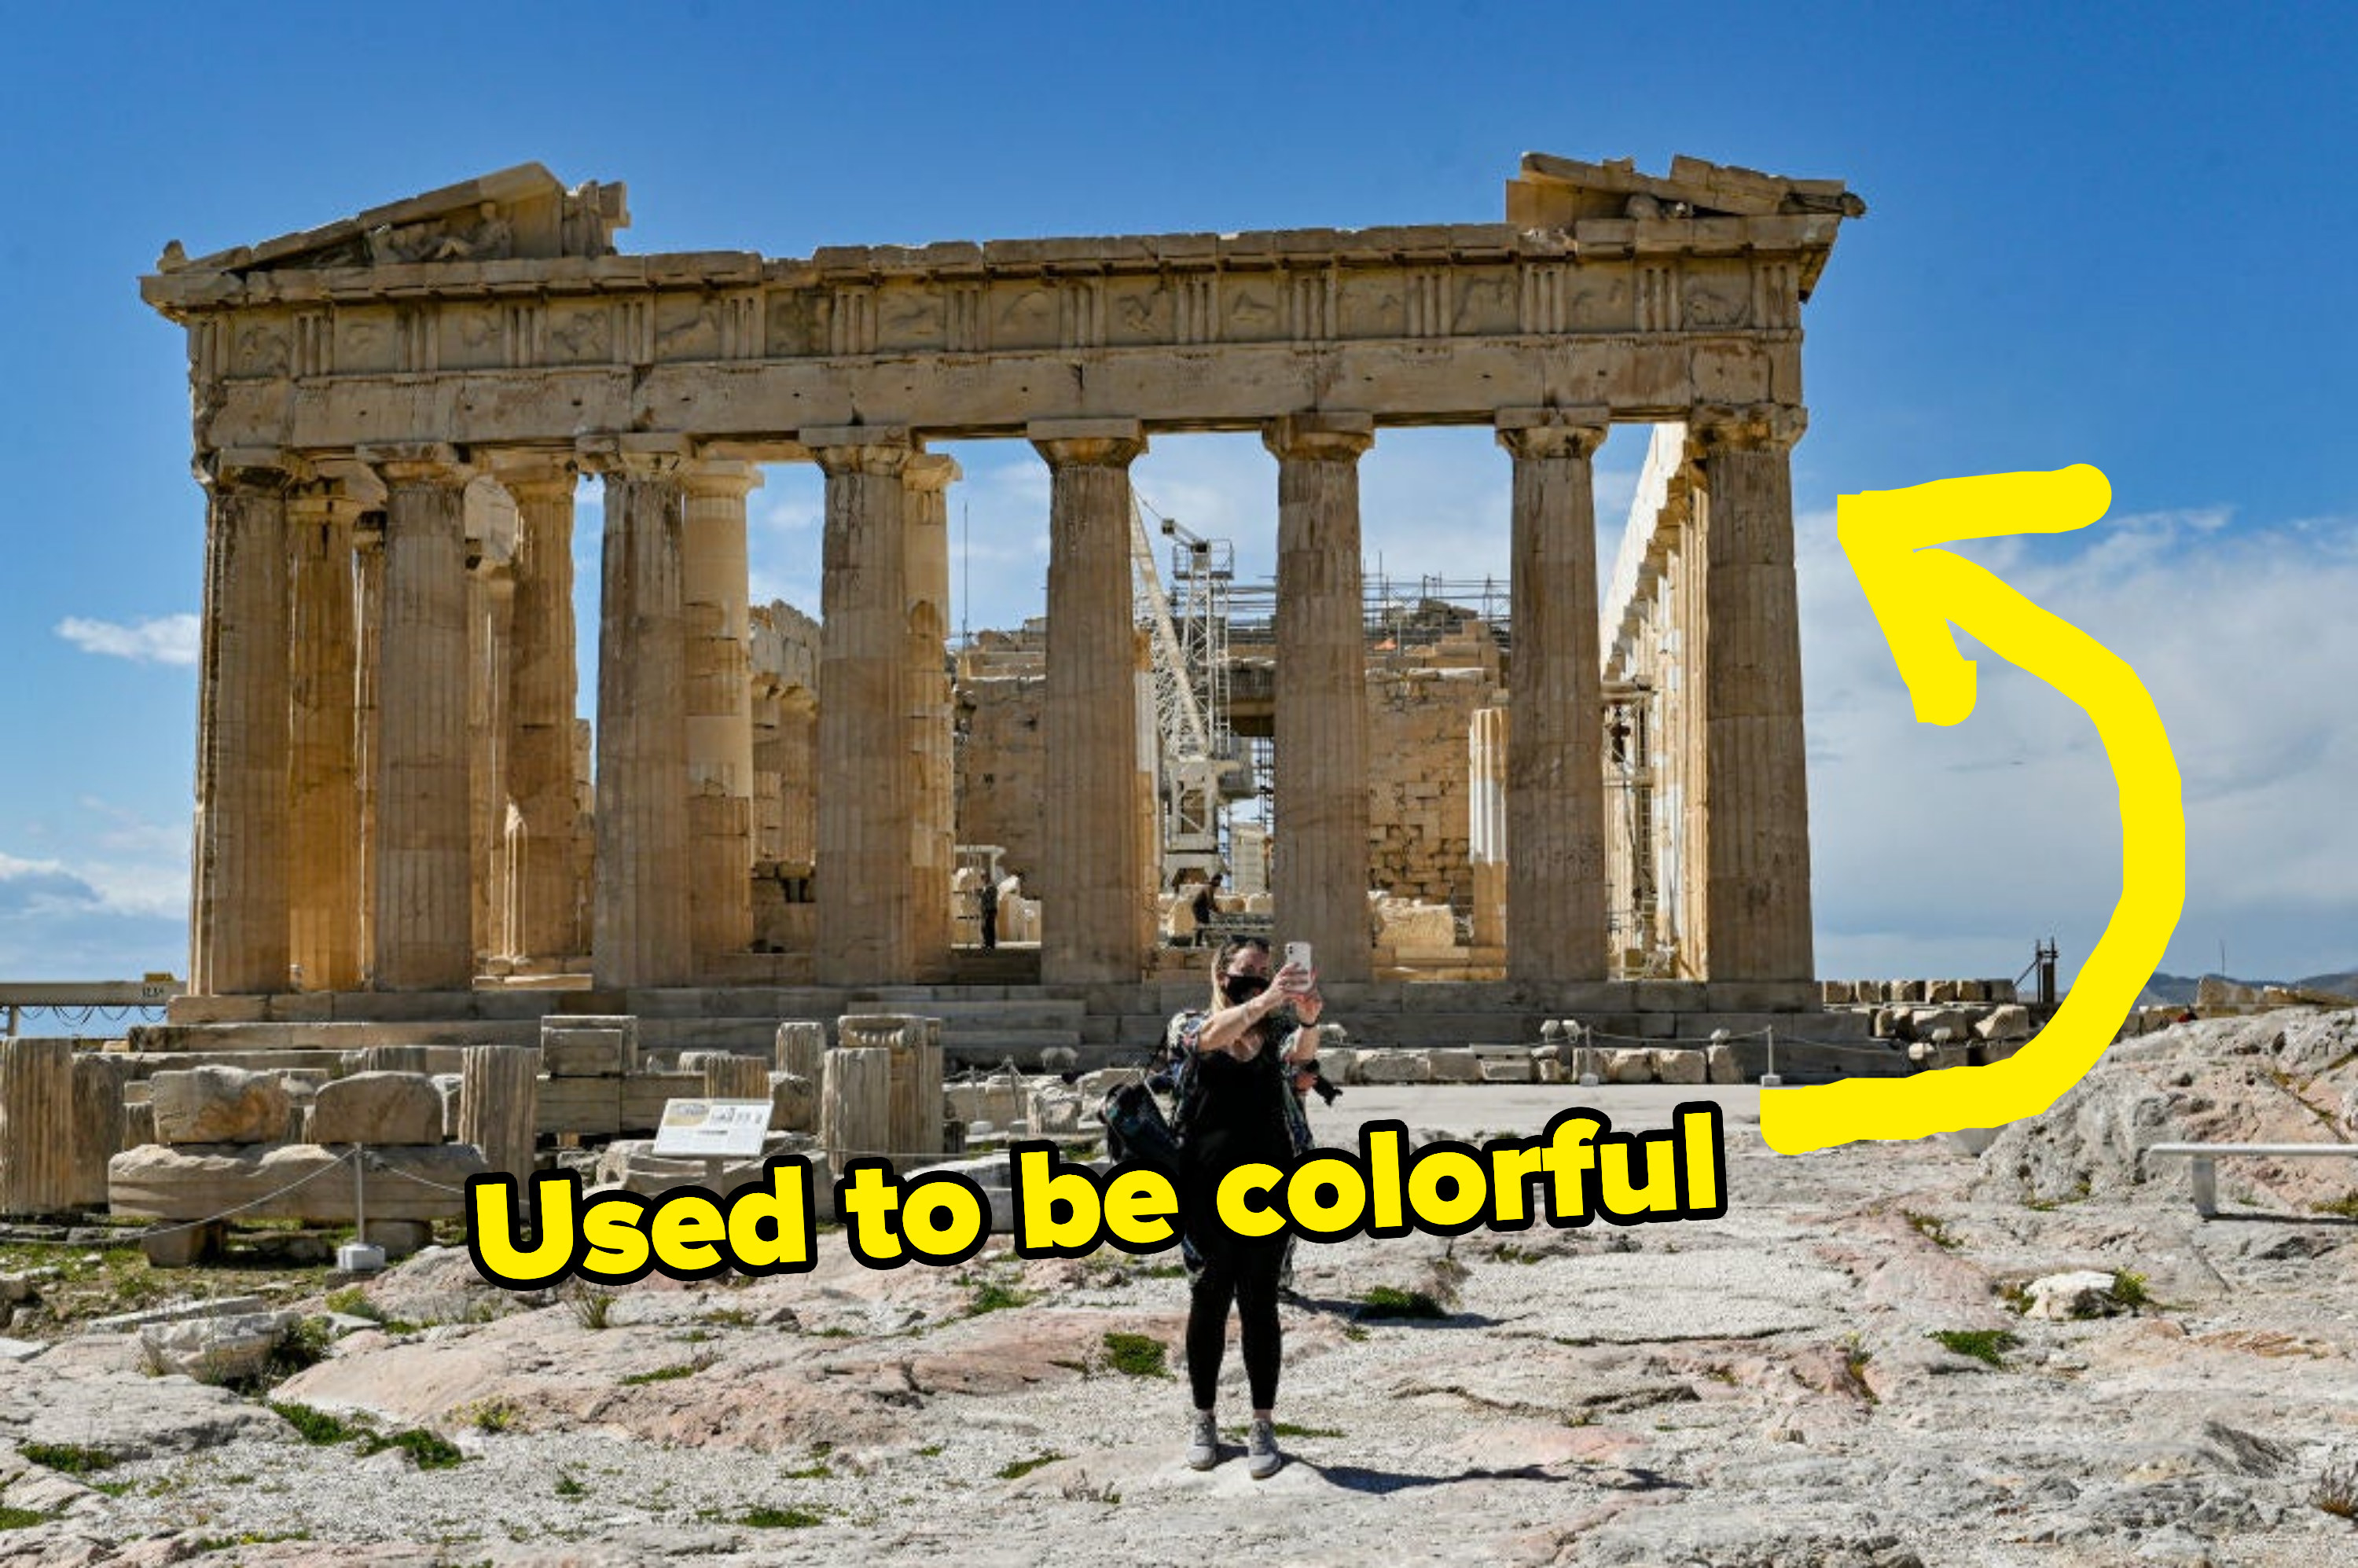 The Parthenon used to be colorful